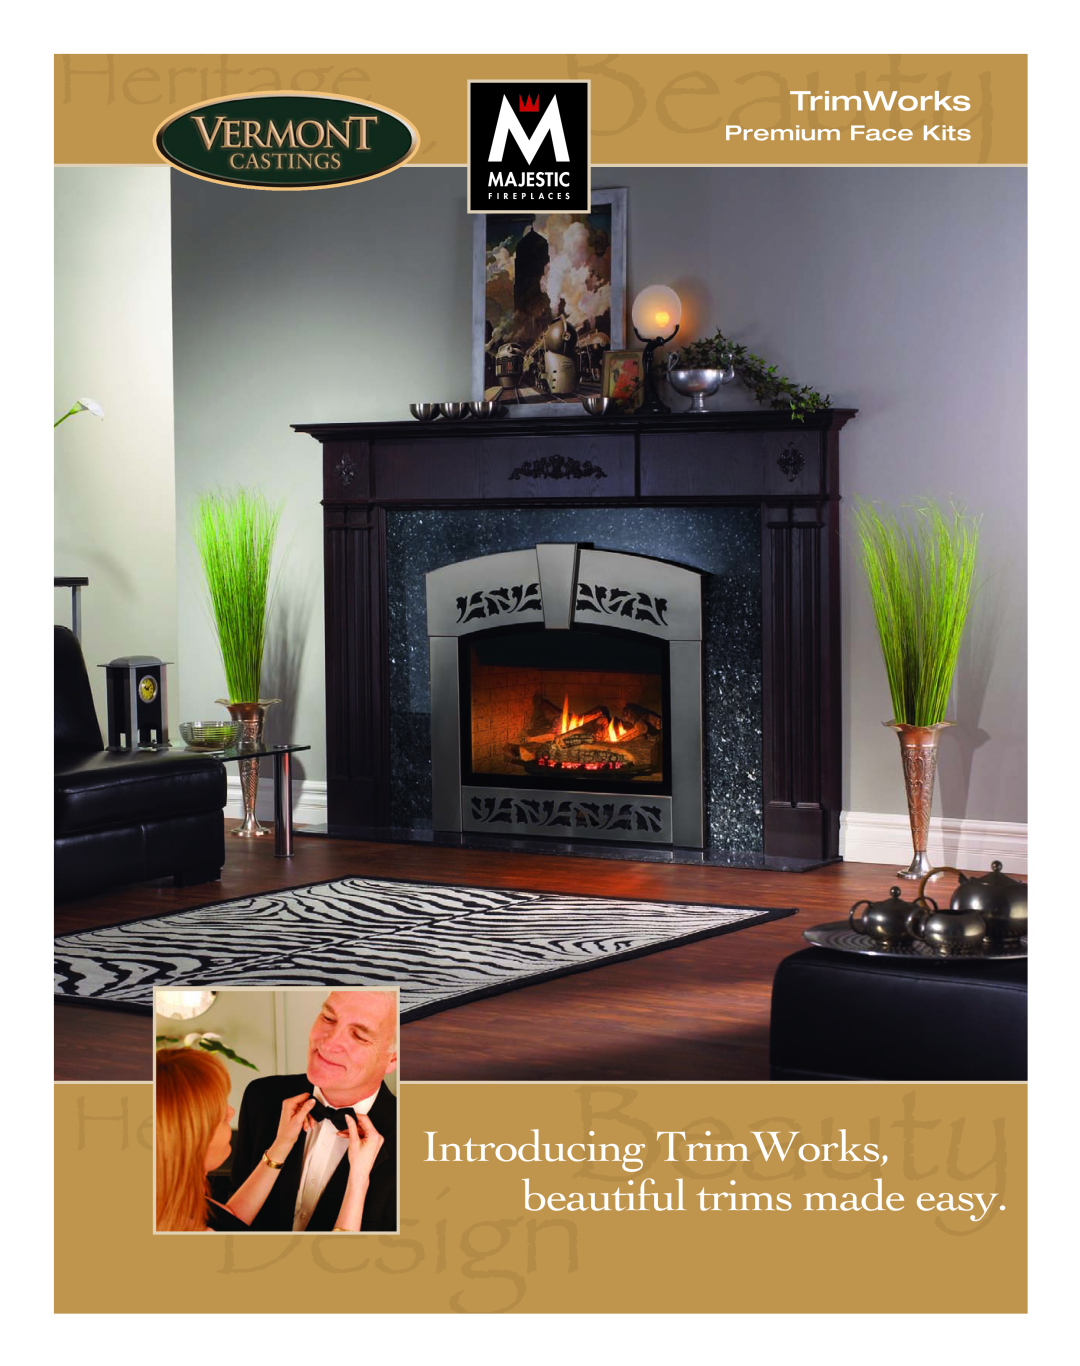 Vermont Casting HG004 manual Introducing TrimWorks, beautiful trims madeeasy, Premium Face Kits 